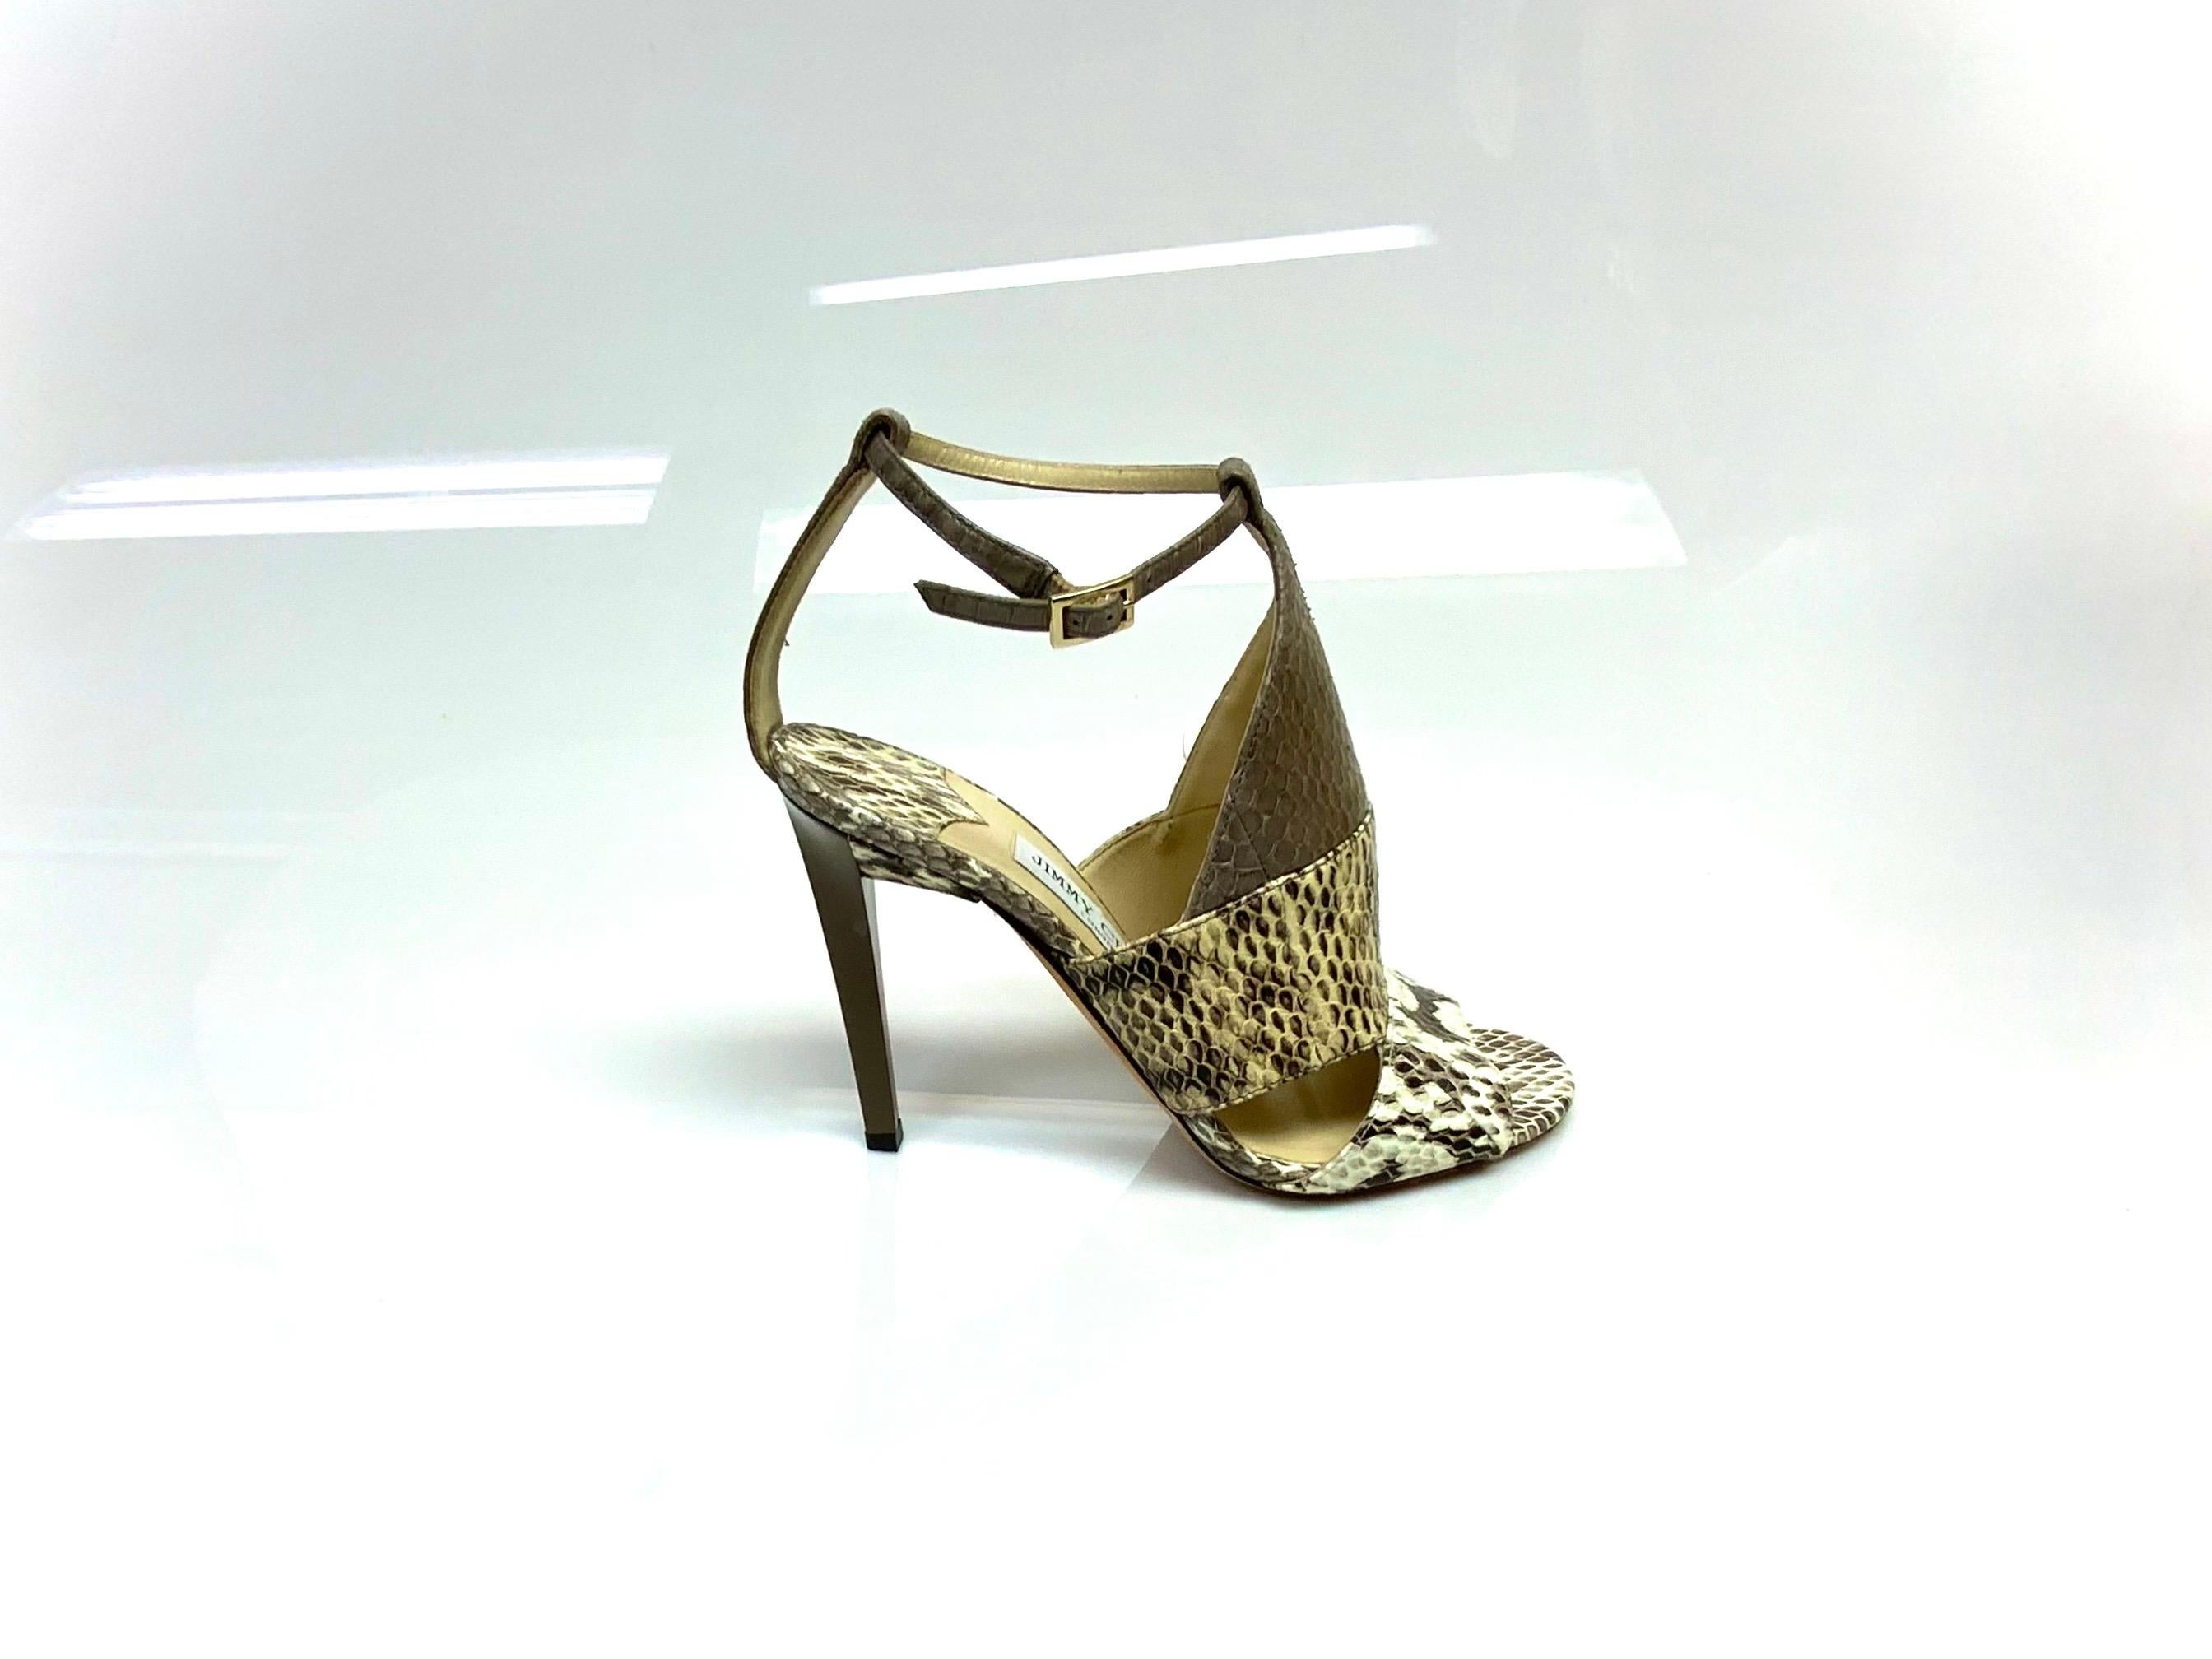 These color block neutral tone snakeskin heels with ankle straps are stylish and amazing sandals from the brilliant designer Jimmy Choo. As expected from Jimmy Choo, the attention to detail and quality is second to none and would make the perfect